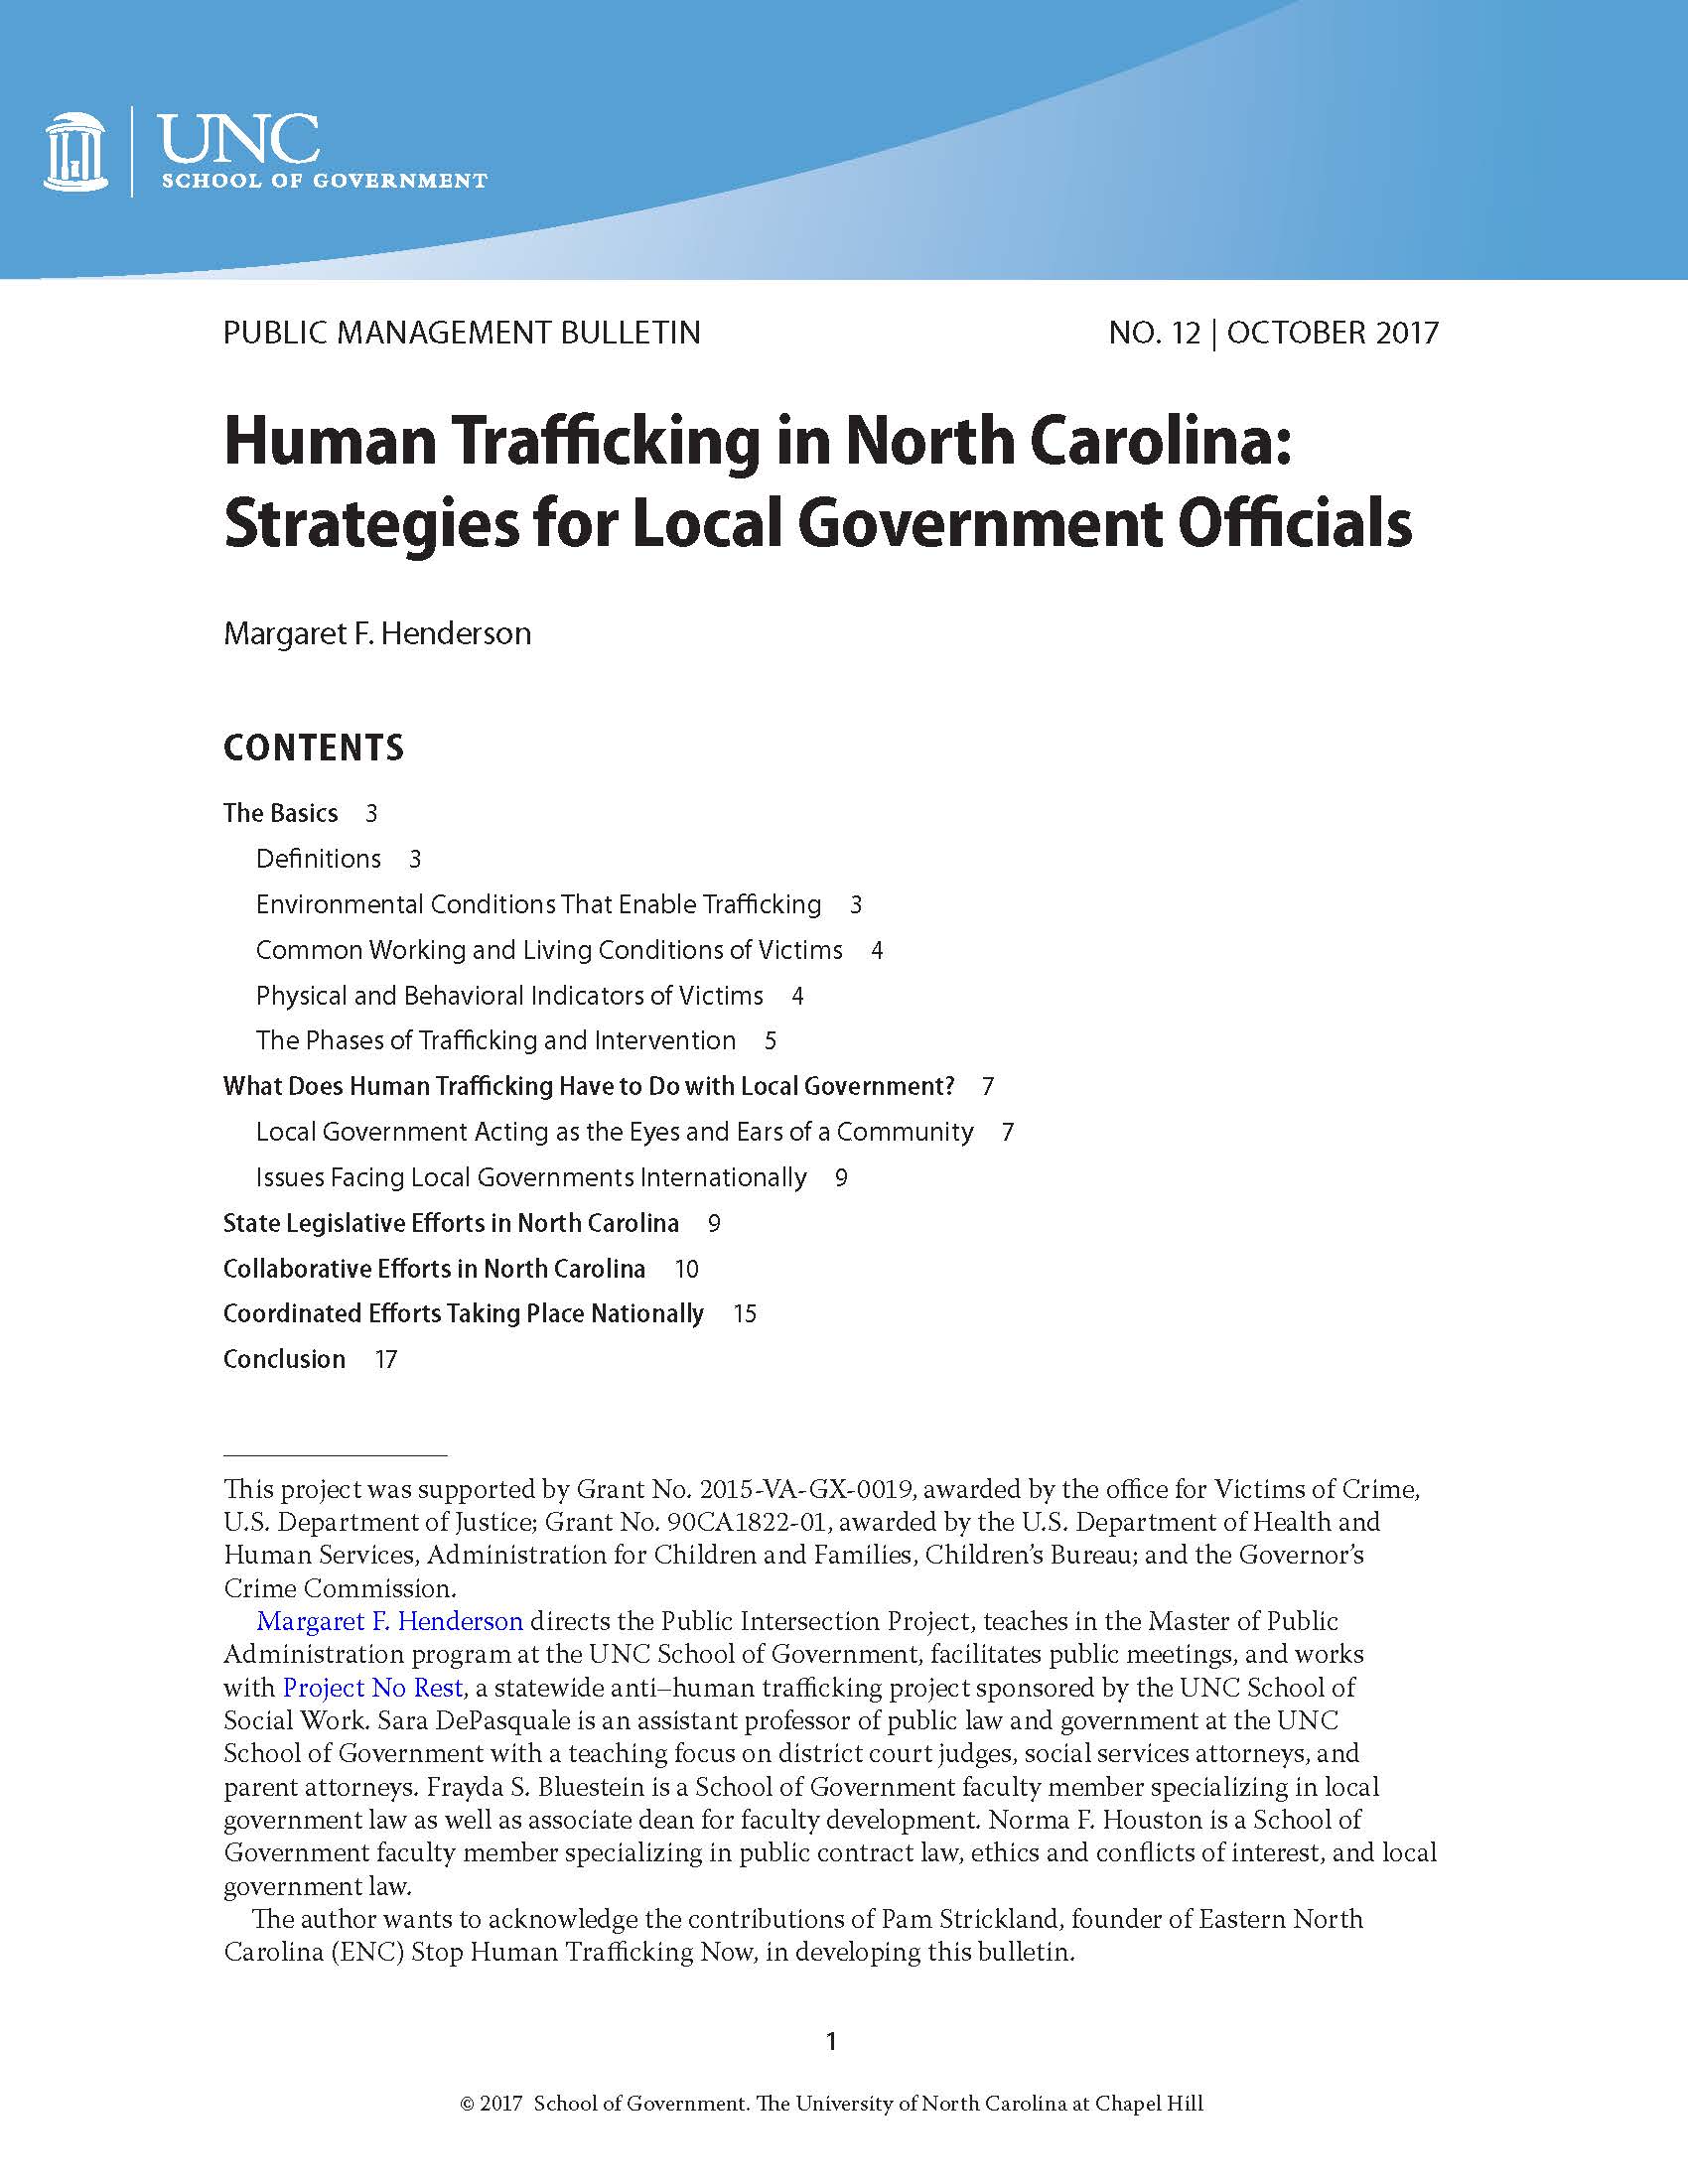 Cover image for Human Trafficking in North Carolina: Strategies for Local Government Officials